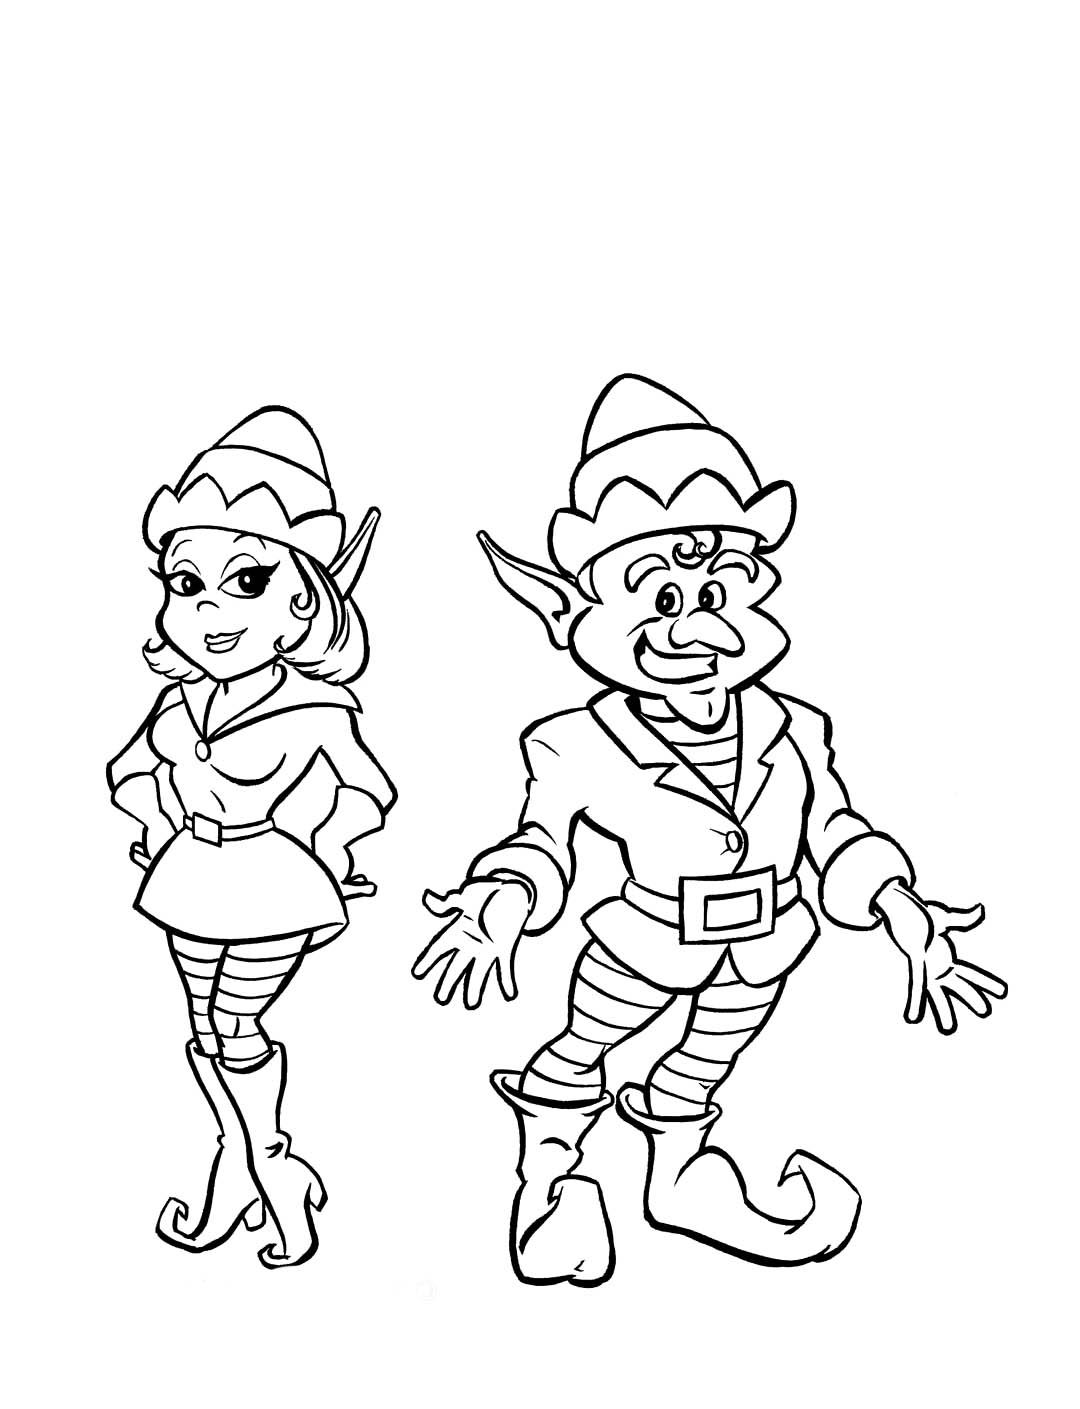 Female Elf Coloring Pages